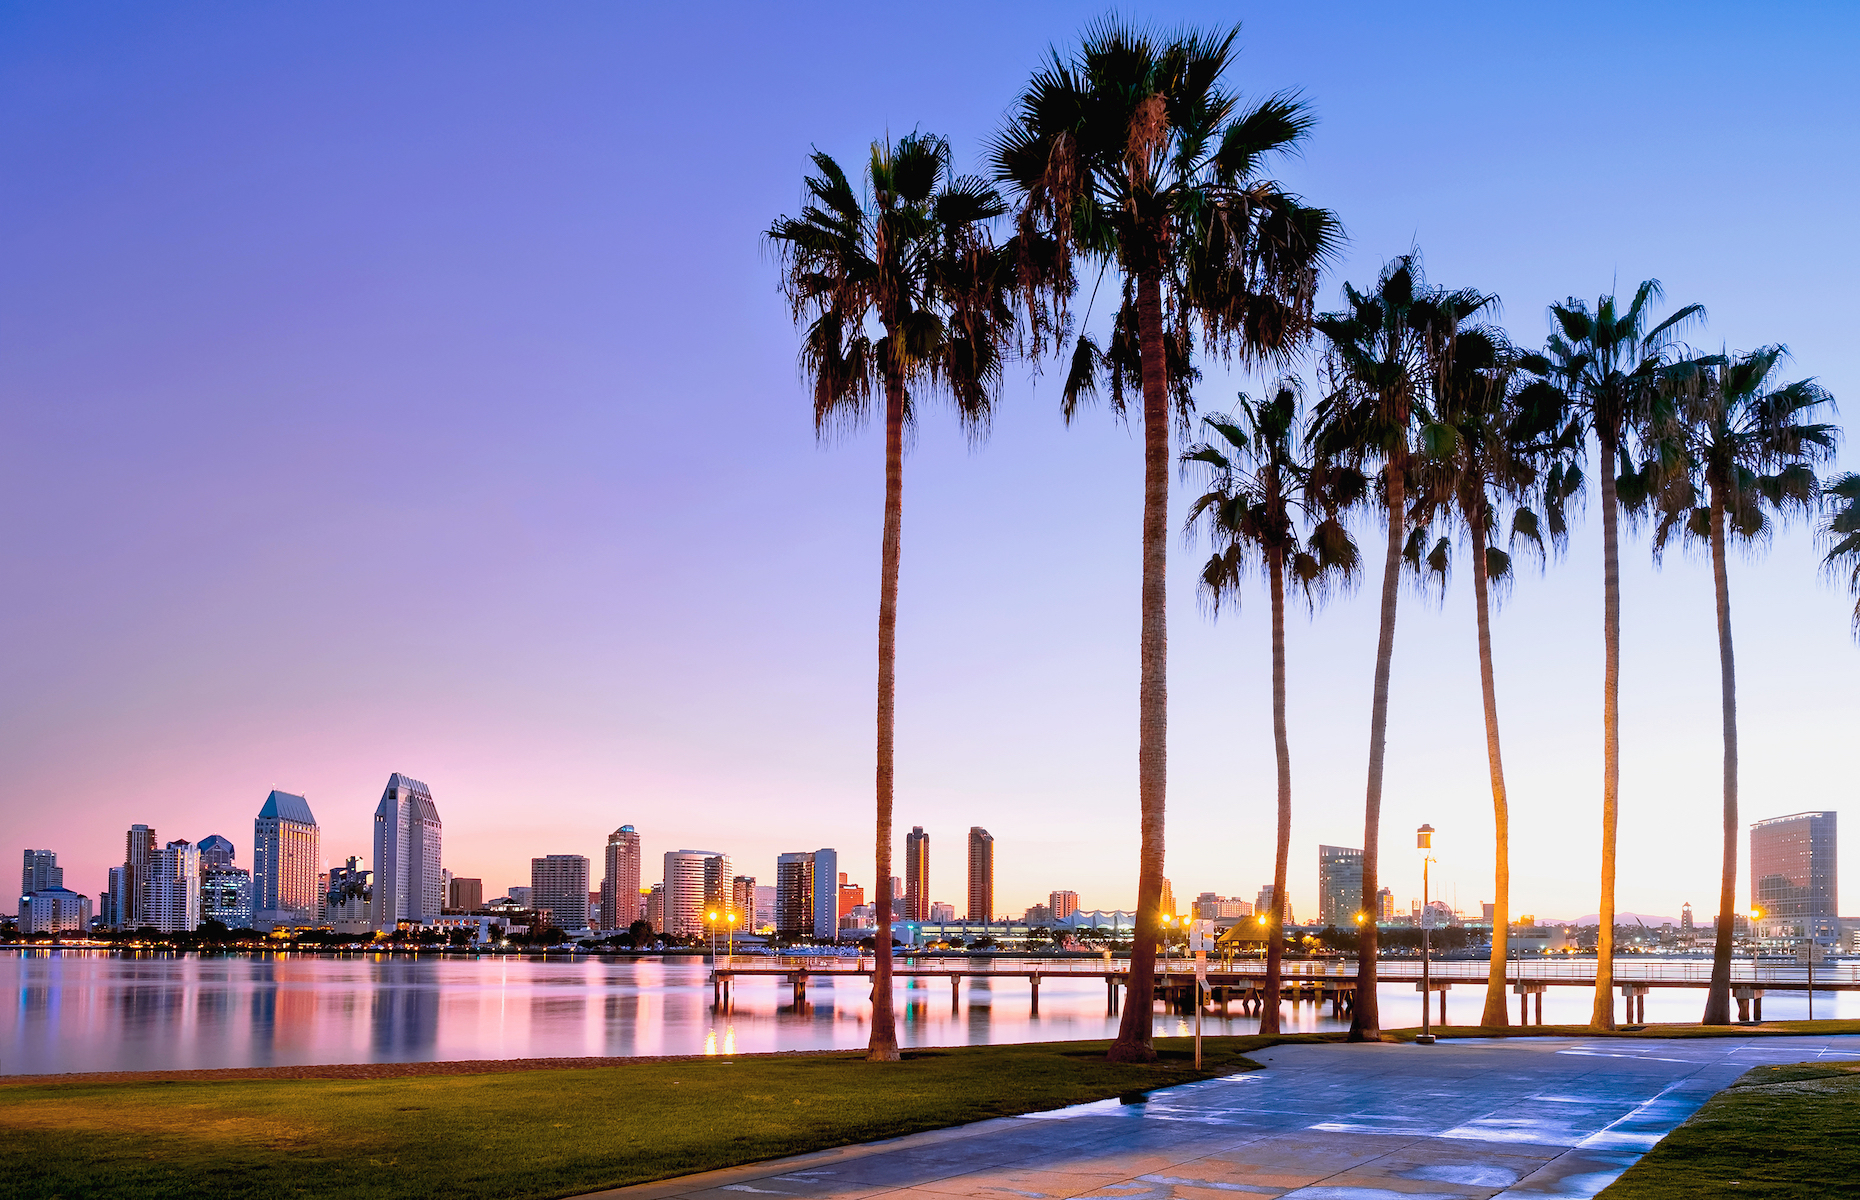 <p>Famous for its beautiful beachside setting and sunny climate, San Diego is home to over <a href="https://worldpopulationreview.com/us-cities/san-diego-ca-population" title="https://worldpopulationreview.com/us-cities/san-diego-ca-population">one million people</a>. This laid-back, West Coast city is adjacent to the Mexican border and thus boasts a large Hispanic population that influences its food, culture and architecture.</p>